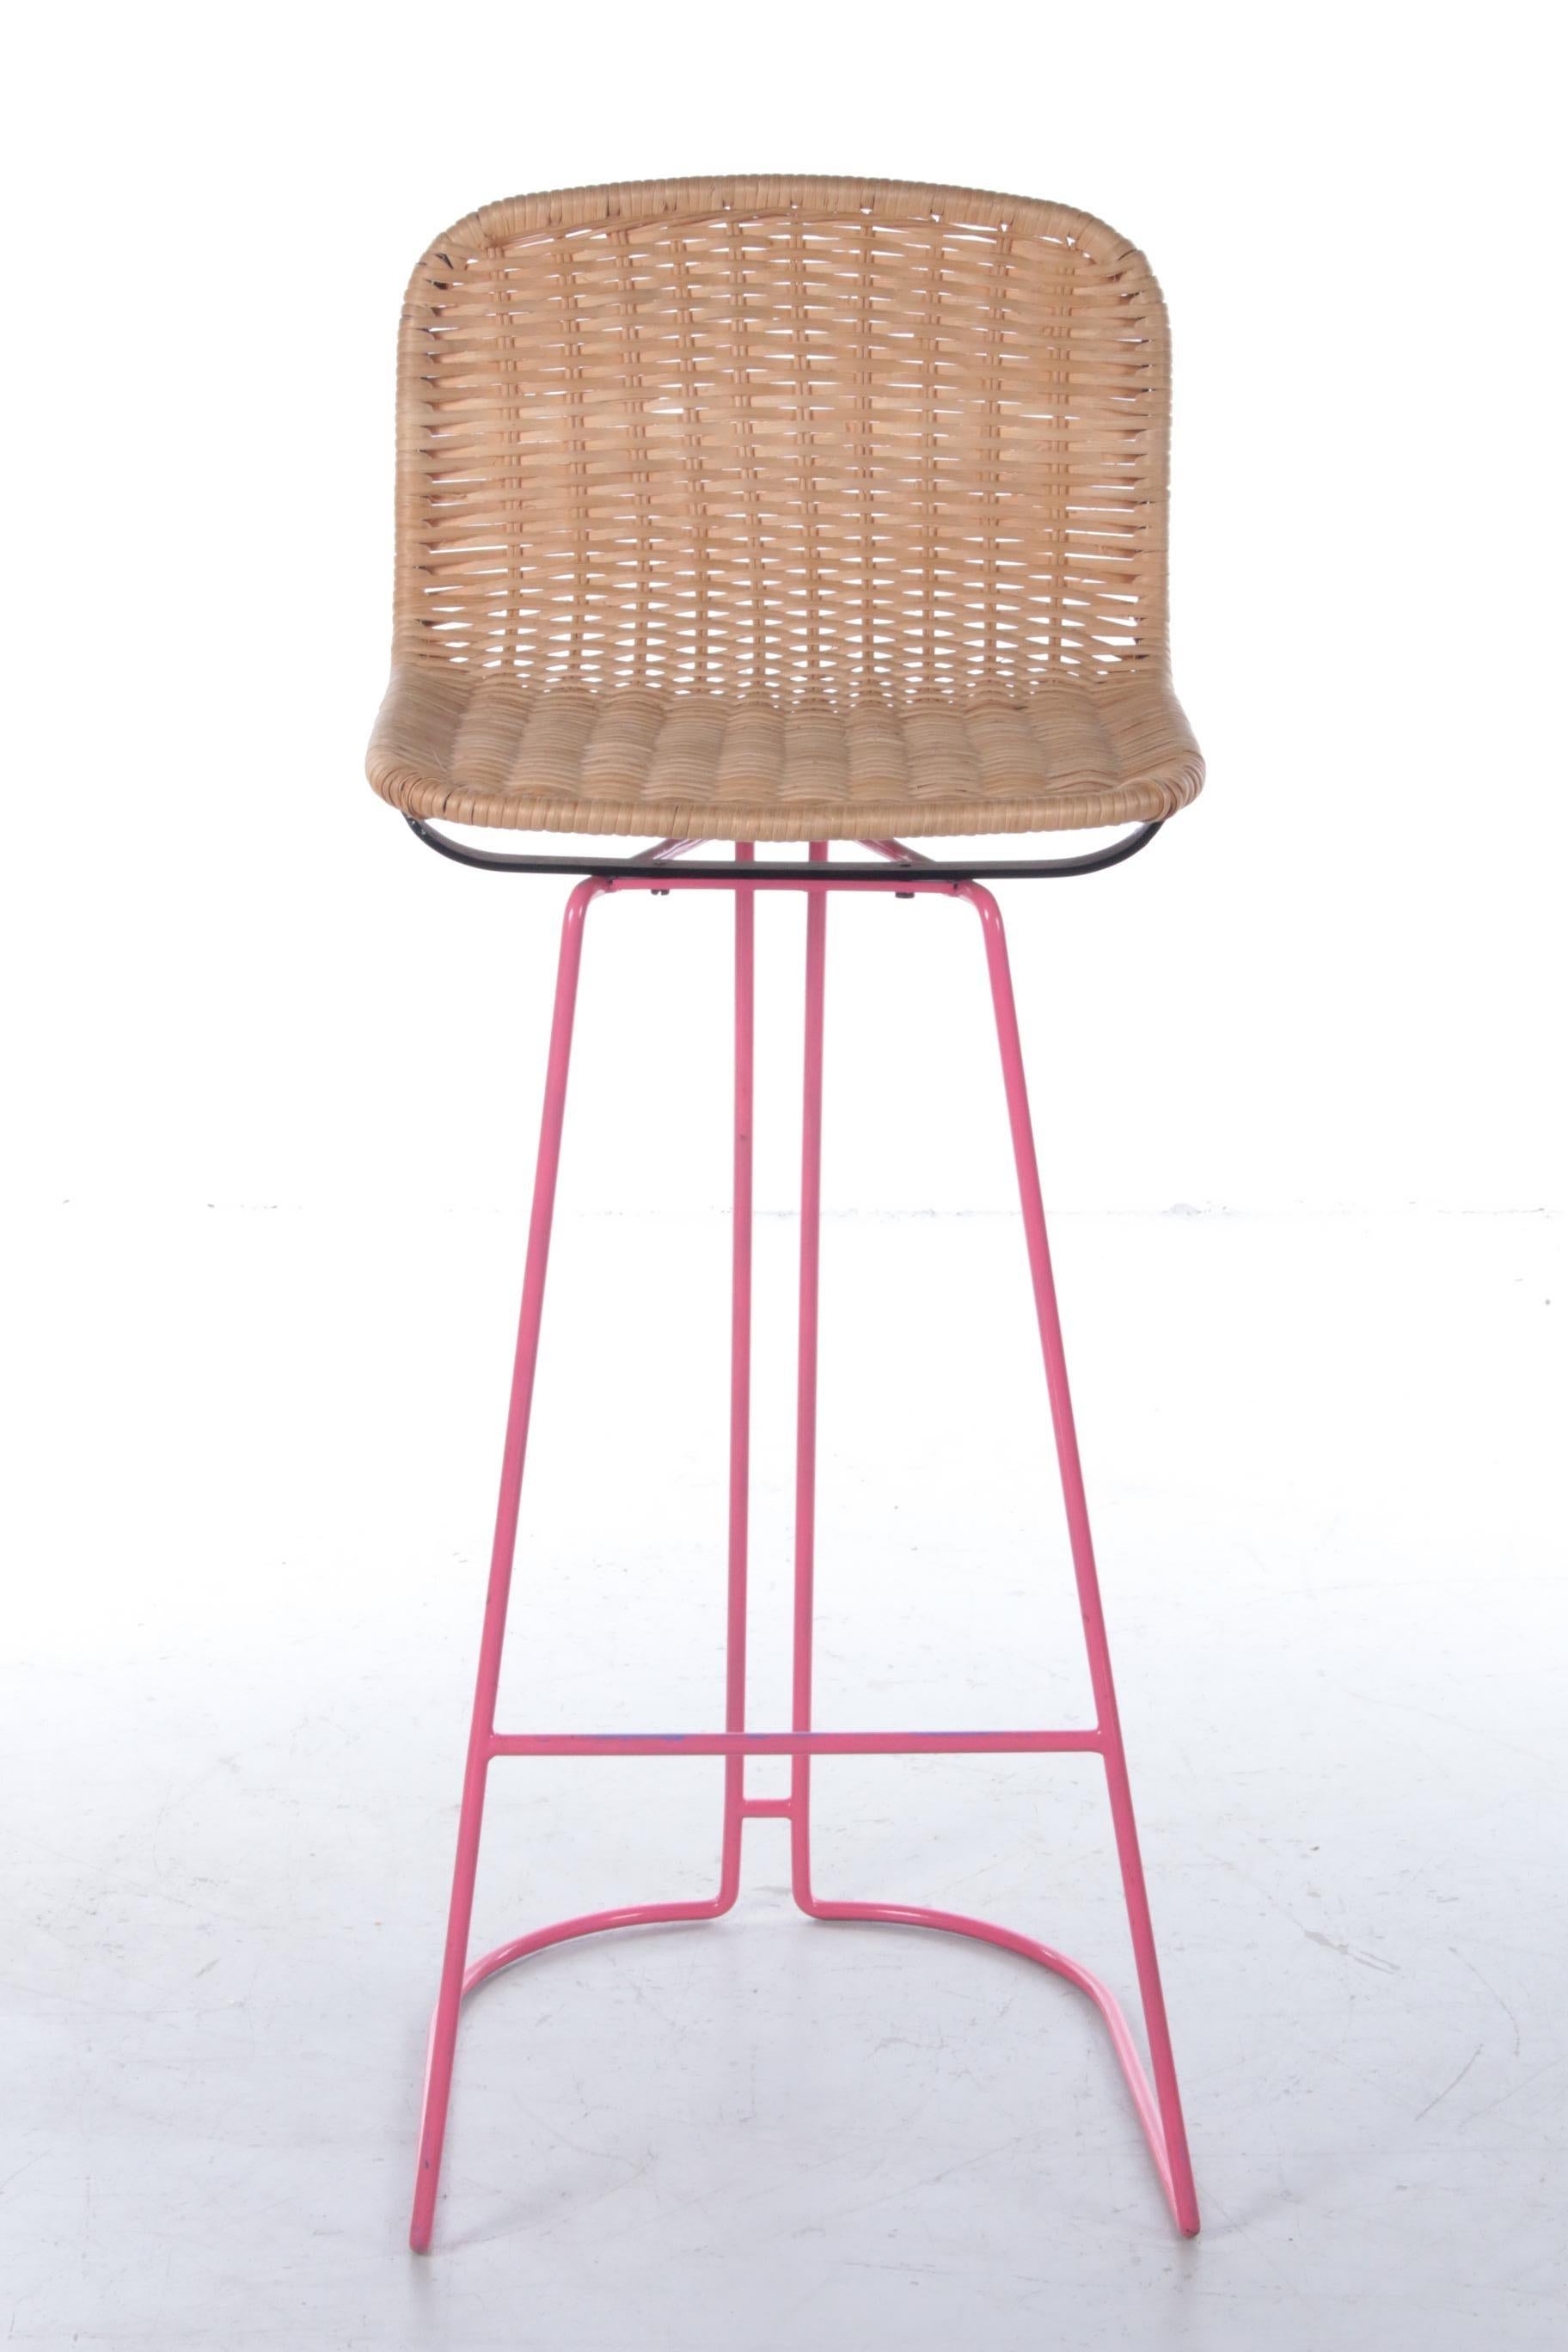 Mid-Century Modern Italian Set of 3 Bar Stools with Wicker and Metal by Cidue, 1980s